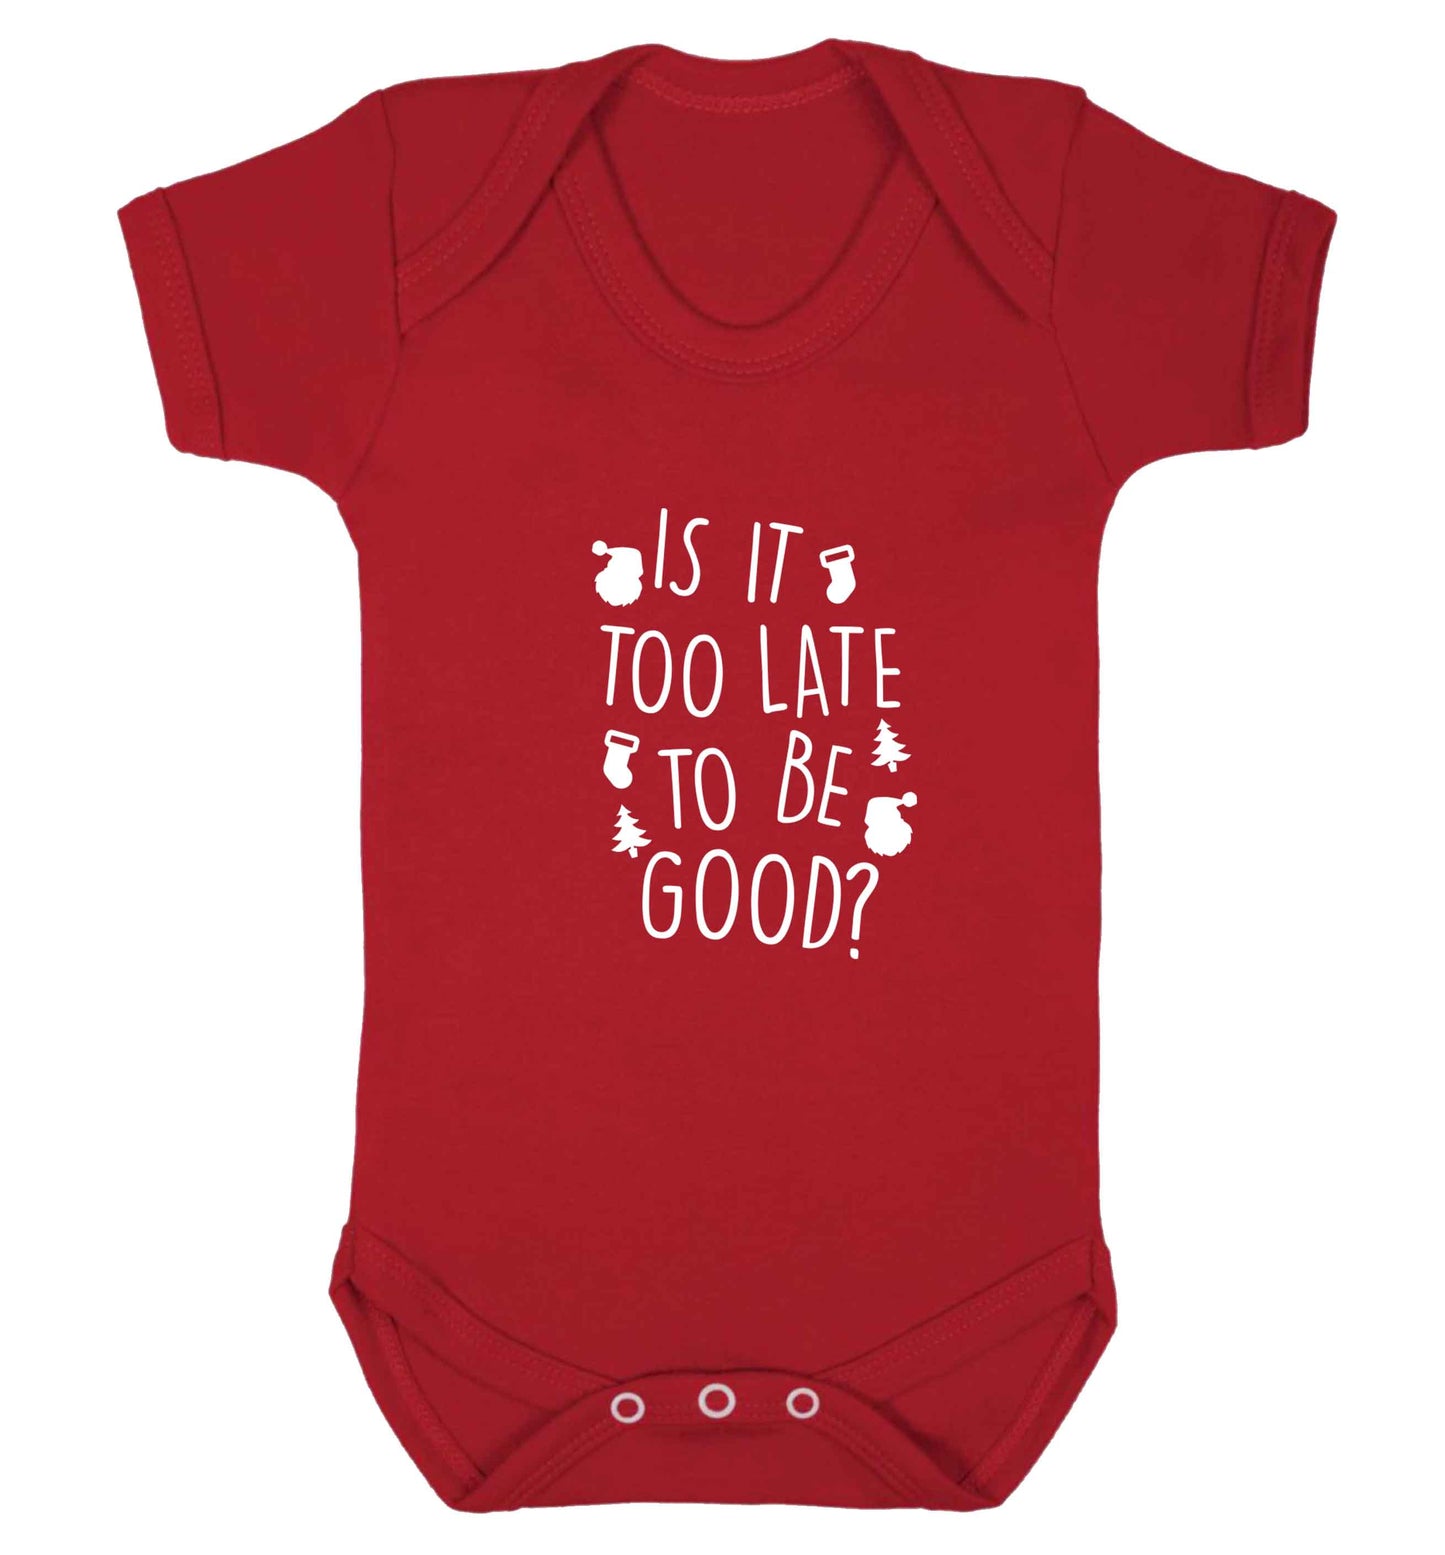 Too Late to be Good baby vest red 18-24 months